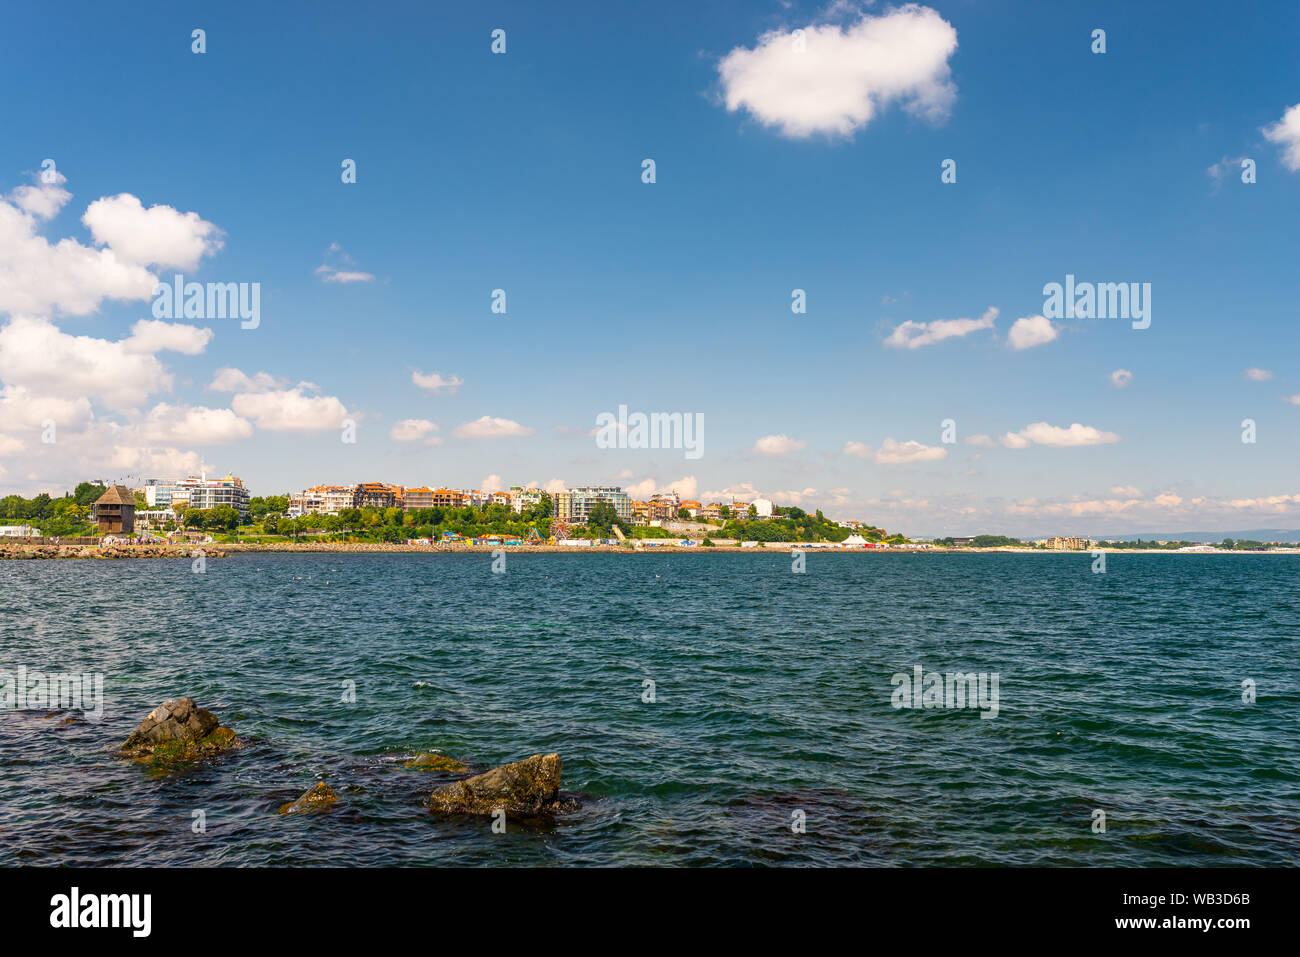 Sunny Beach, Bulgaria July 15, 2019. Hotels and houses on the shores of the Black Sea in Sunny Beach seen from afar. Stock Photo